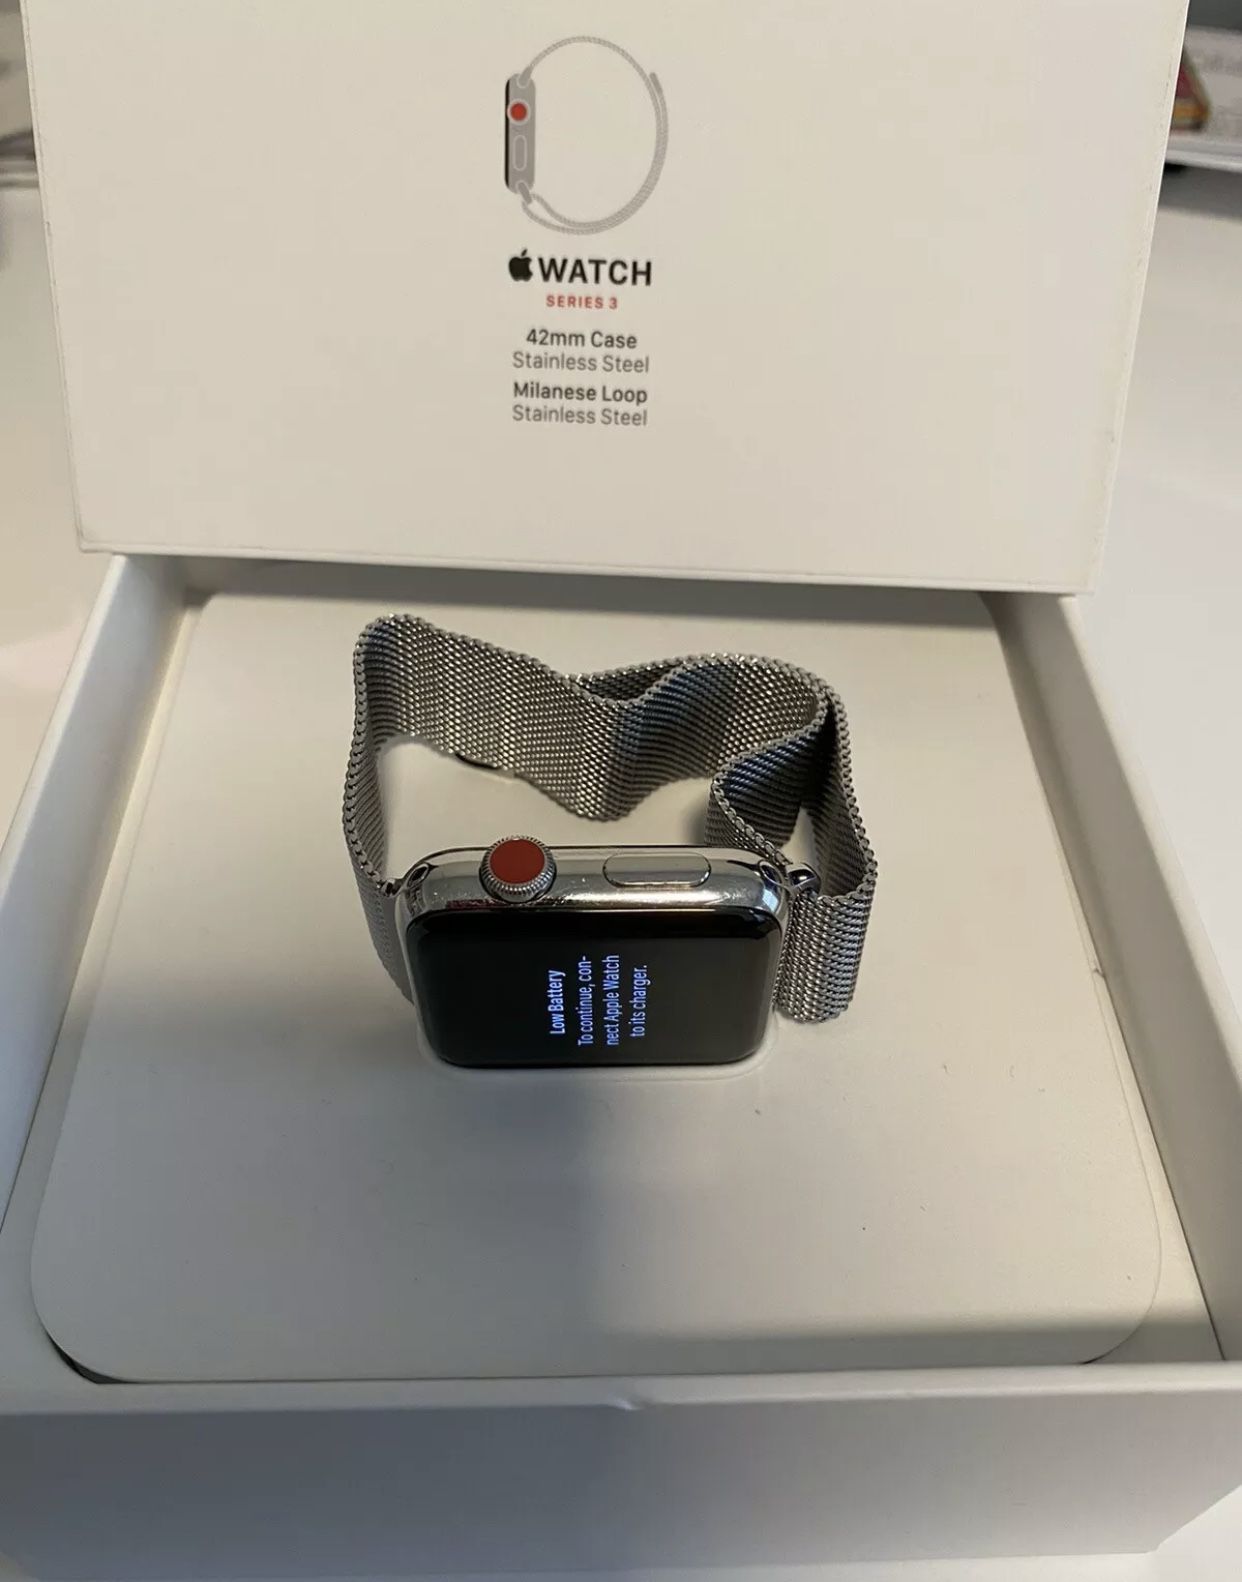 Apple Watch Series 3 42mm Stainless Steel (GPS + Cellular) w/ Milanese Loop (PERFECT CONDITION)